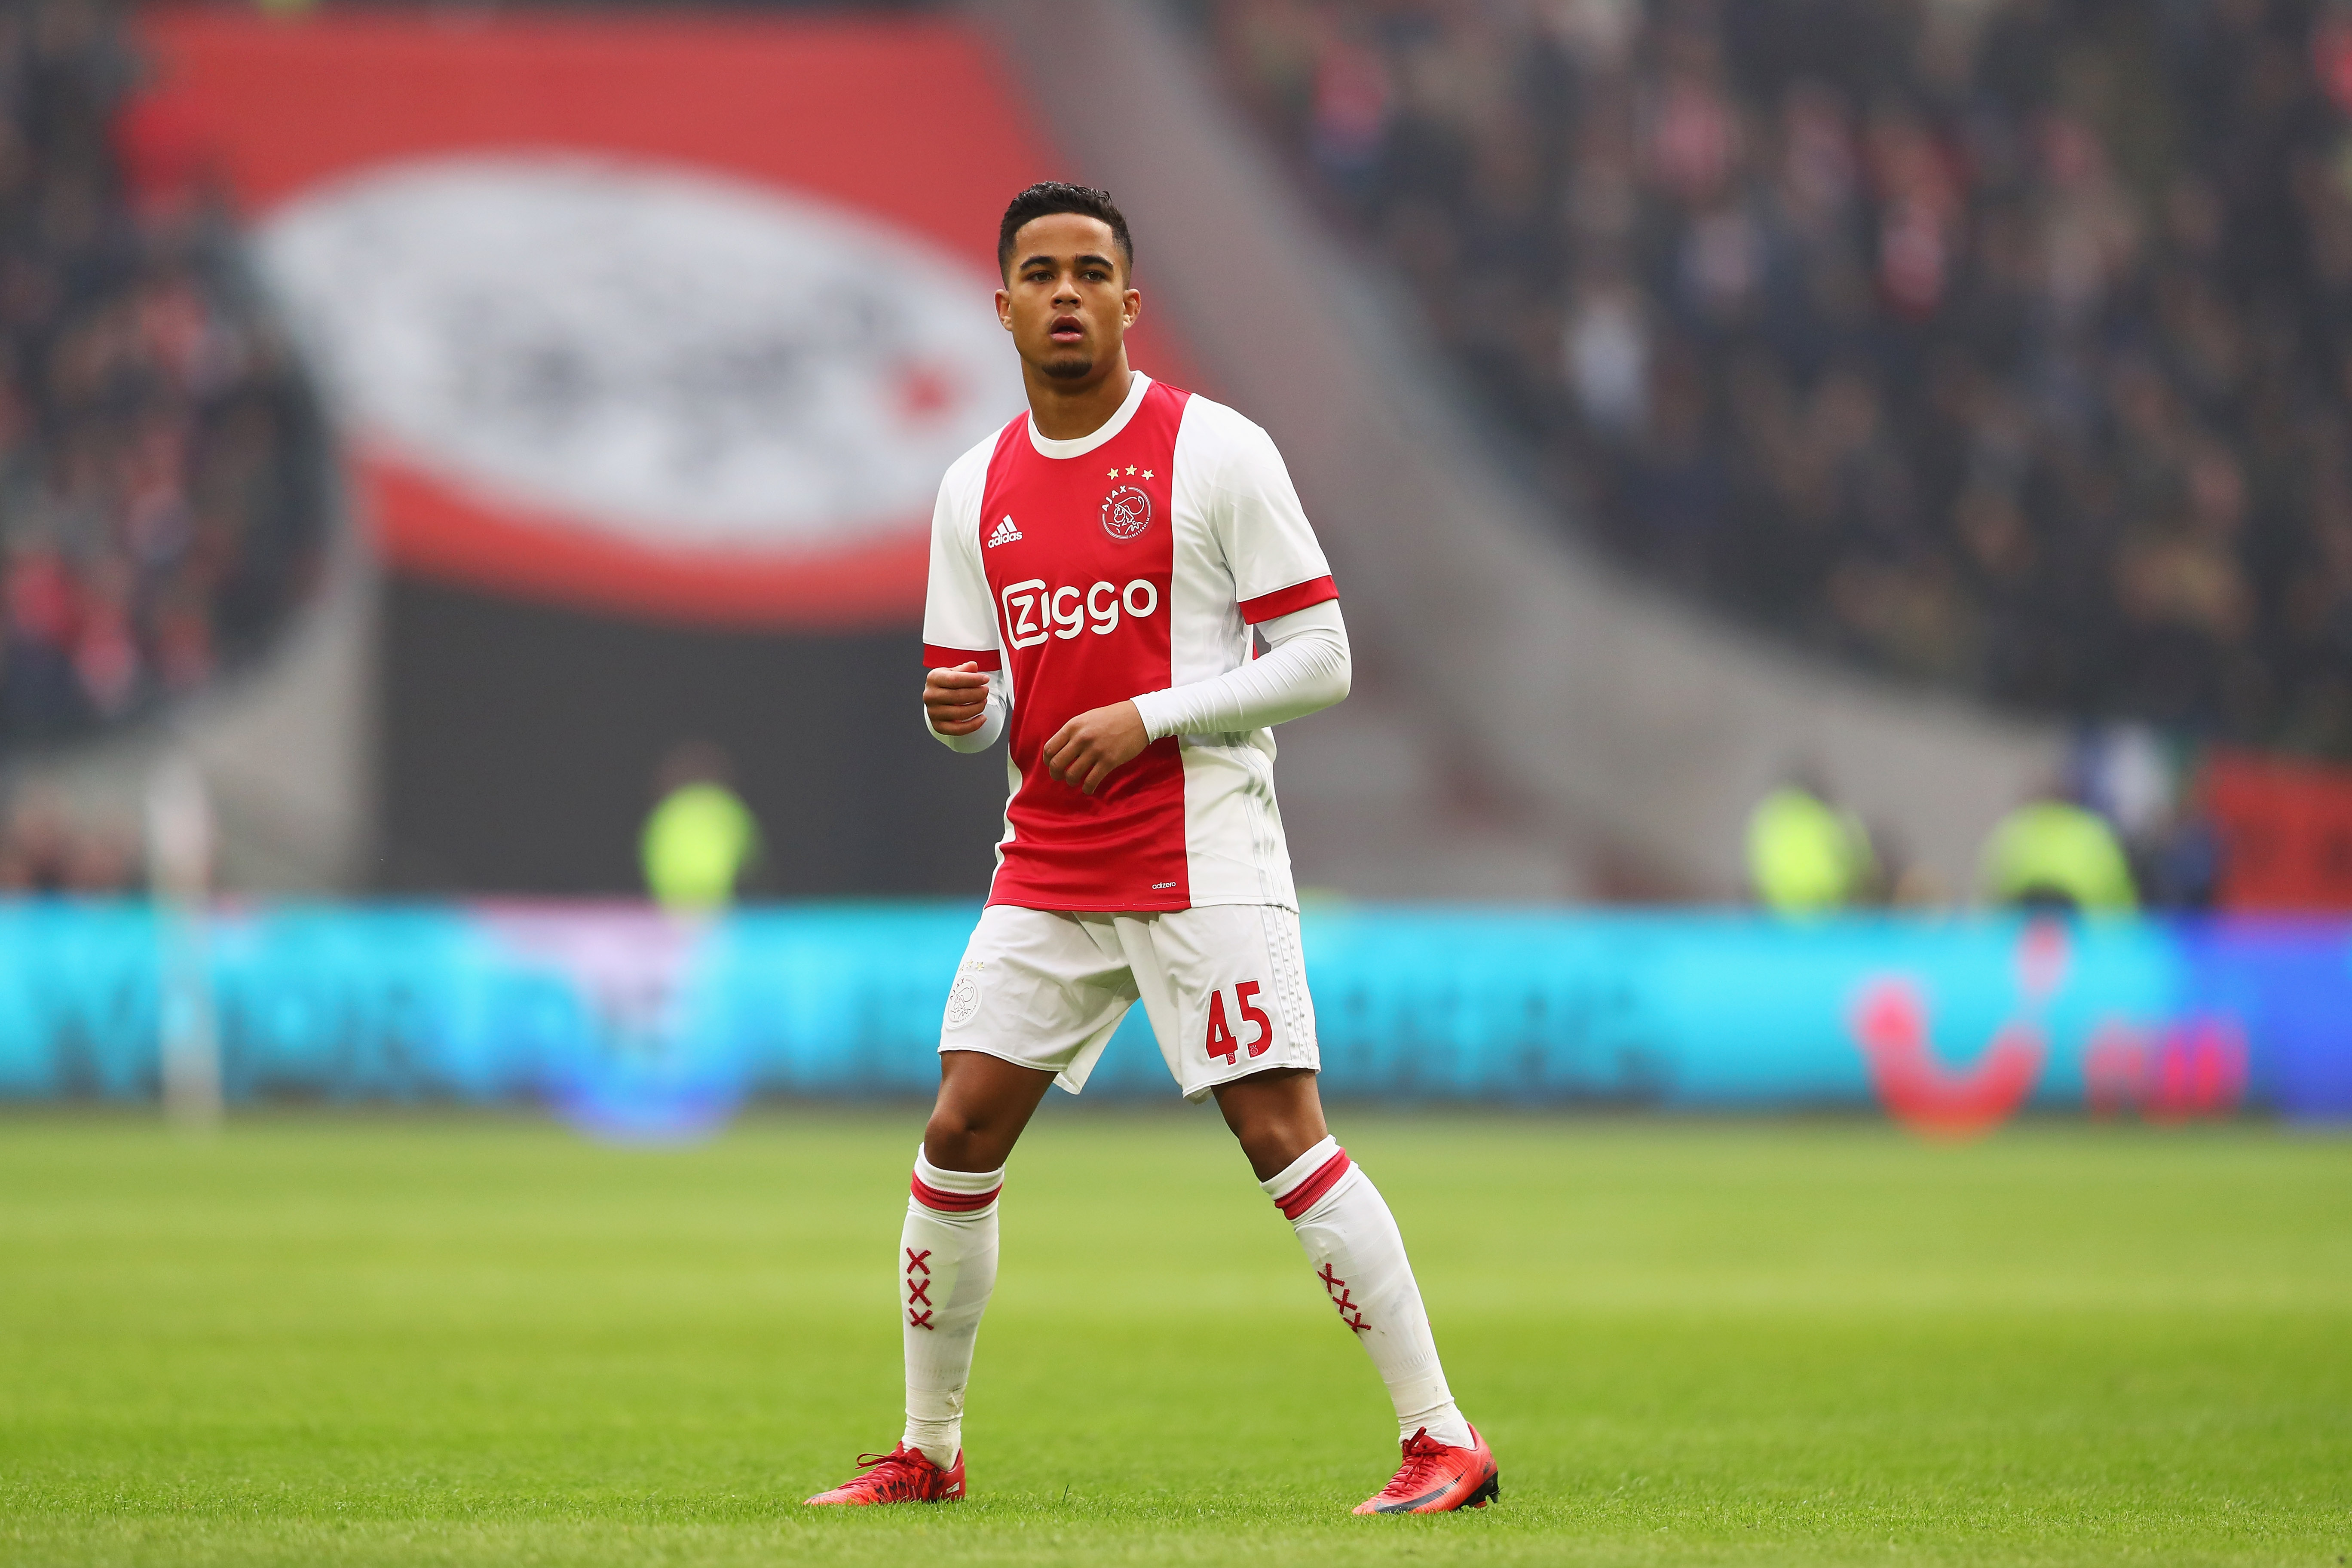 AMSTERDAM, NETHERLANDS - JANUARY 21:  Justin Kluivert of Ajax in action during the Dutch Eredivisie match between Ajax Amsterdam and Feyenoord at Amsterdam ArenA on January 21, 2018 in Amsterdam, Netherlands.  (Photo by Dean Mouhtaropoulos/Getty Images)